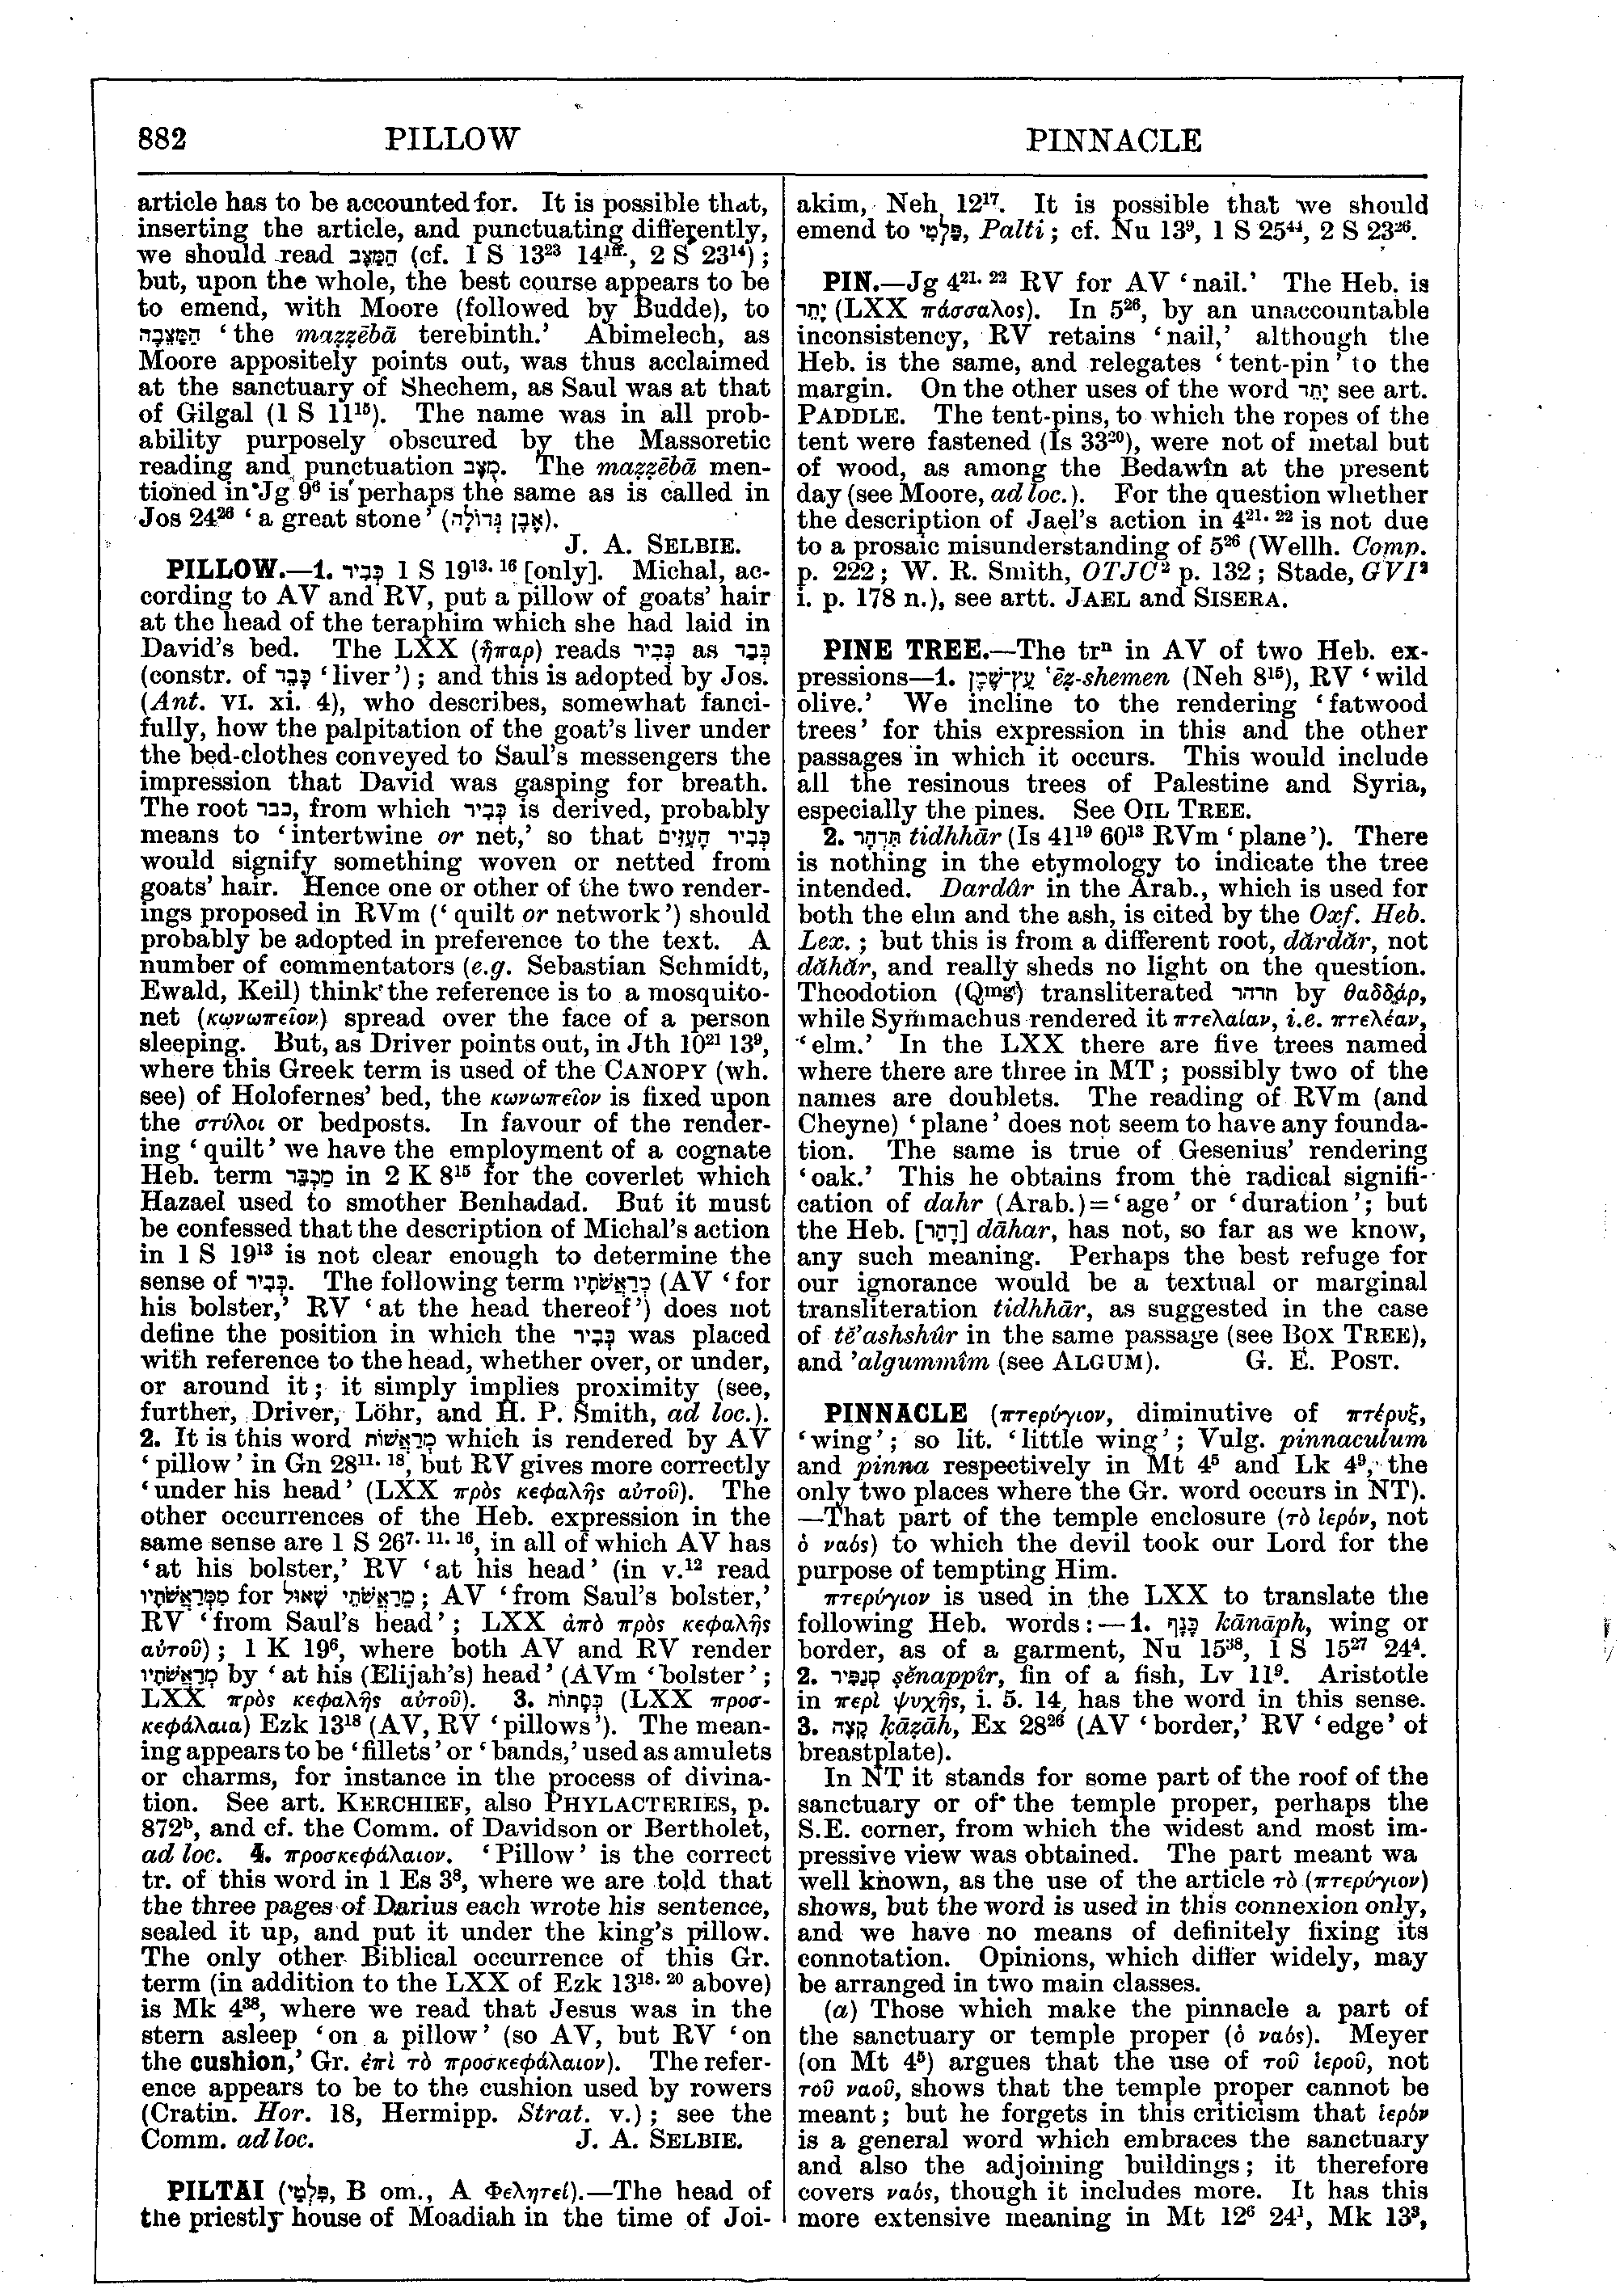 Image of page 882